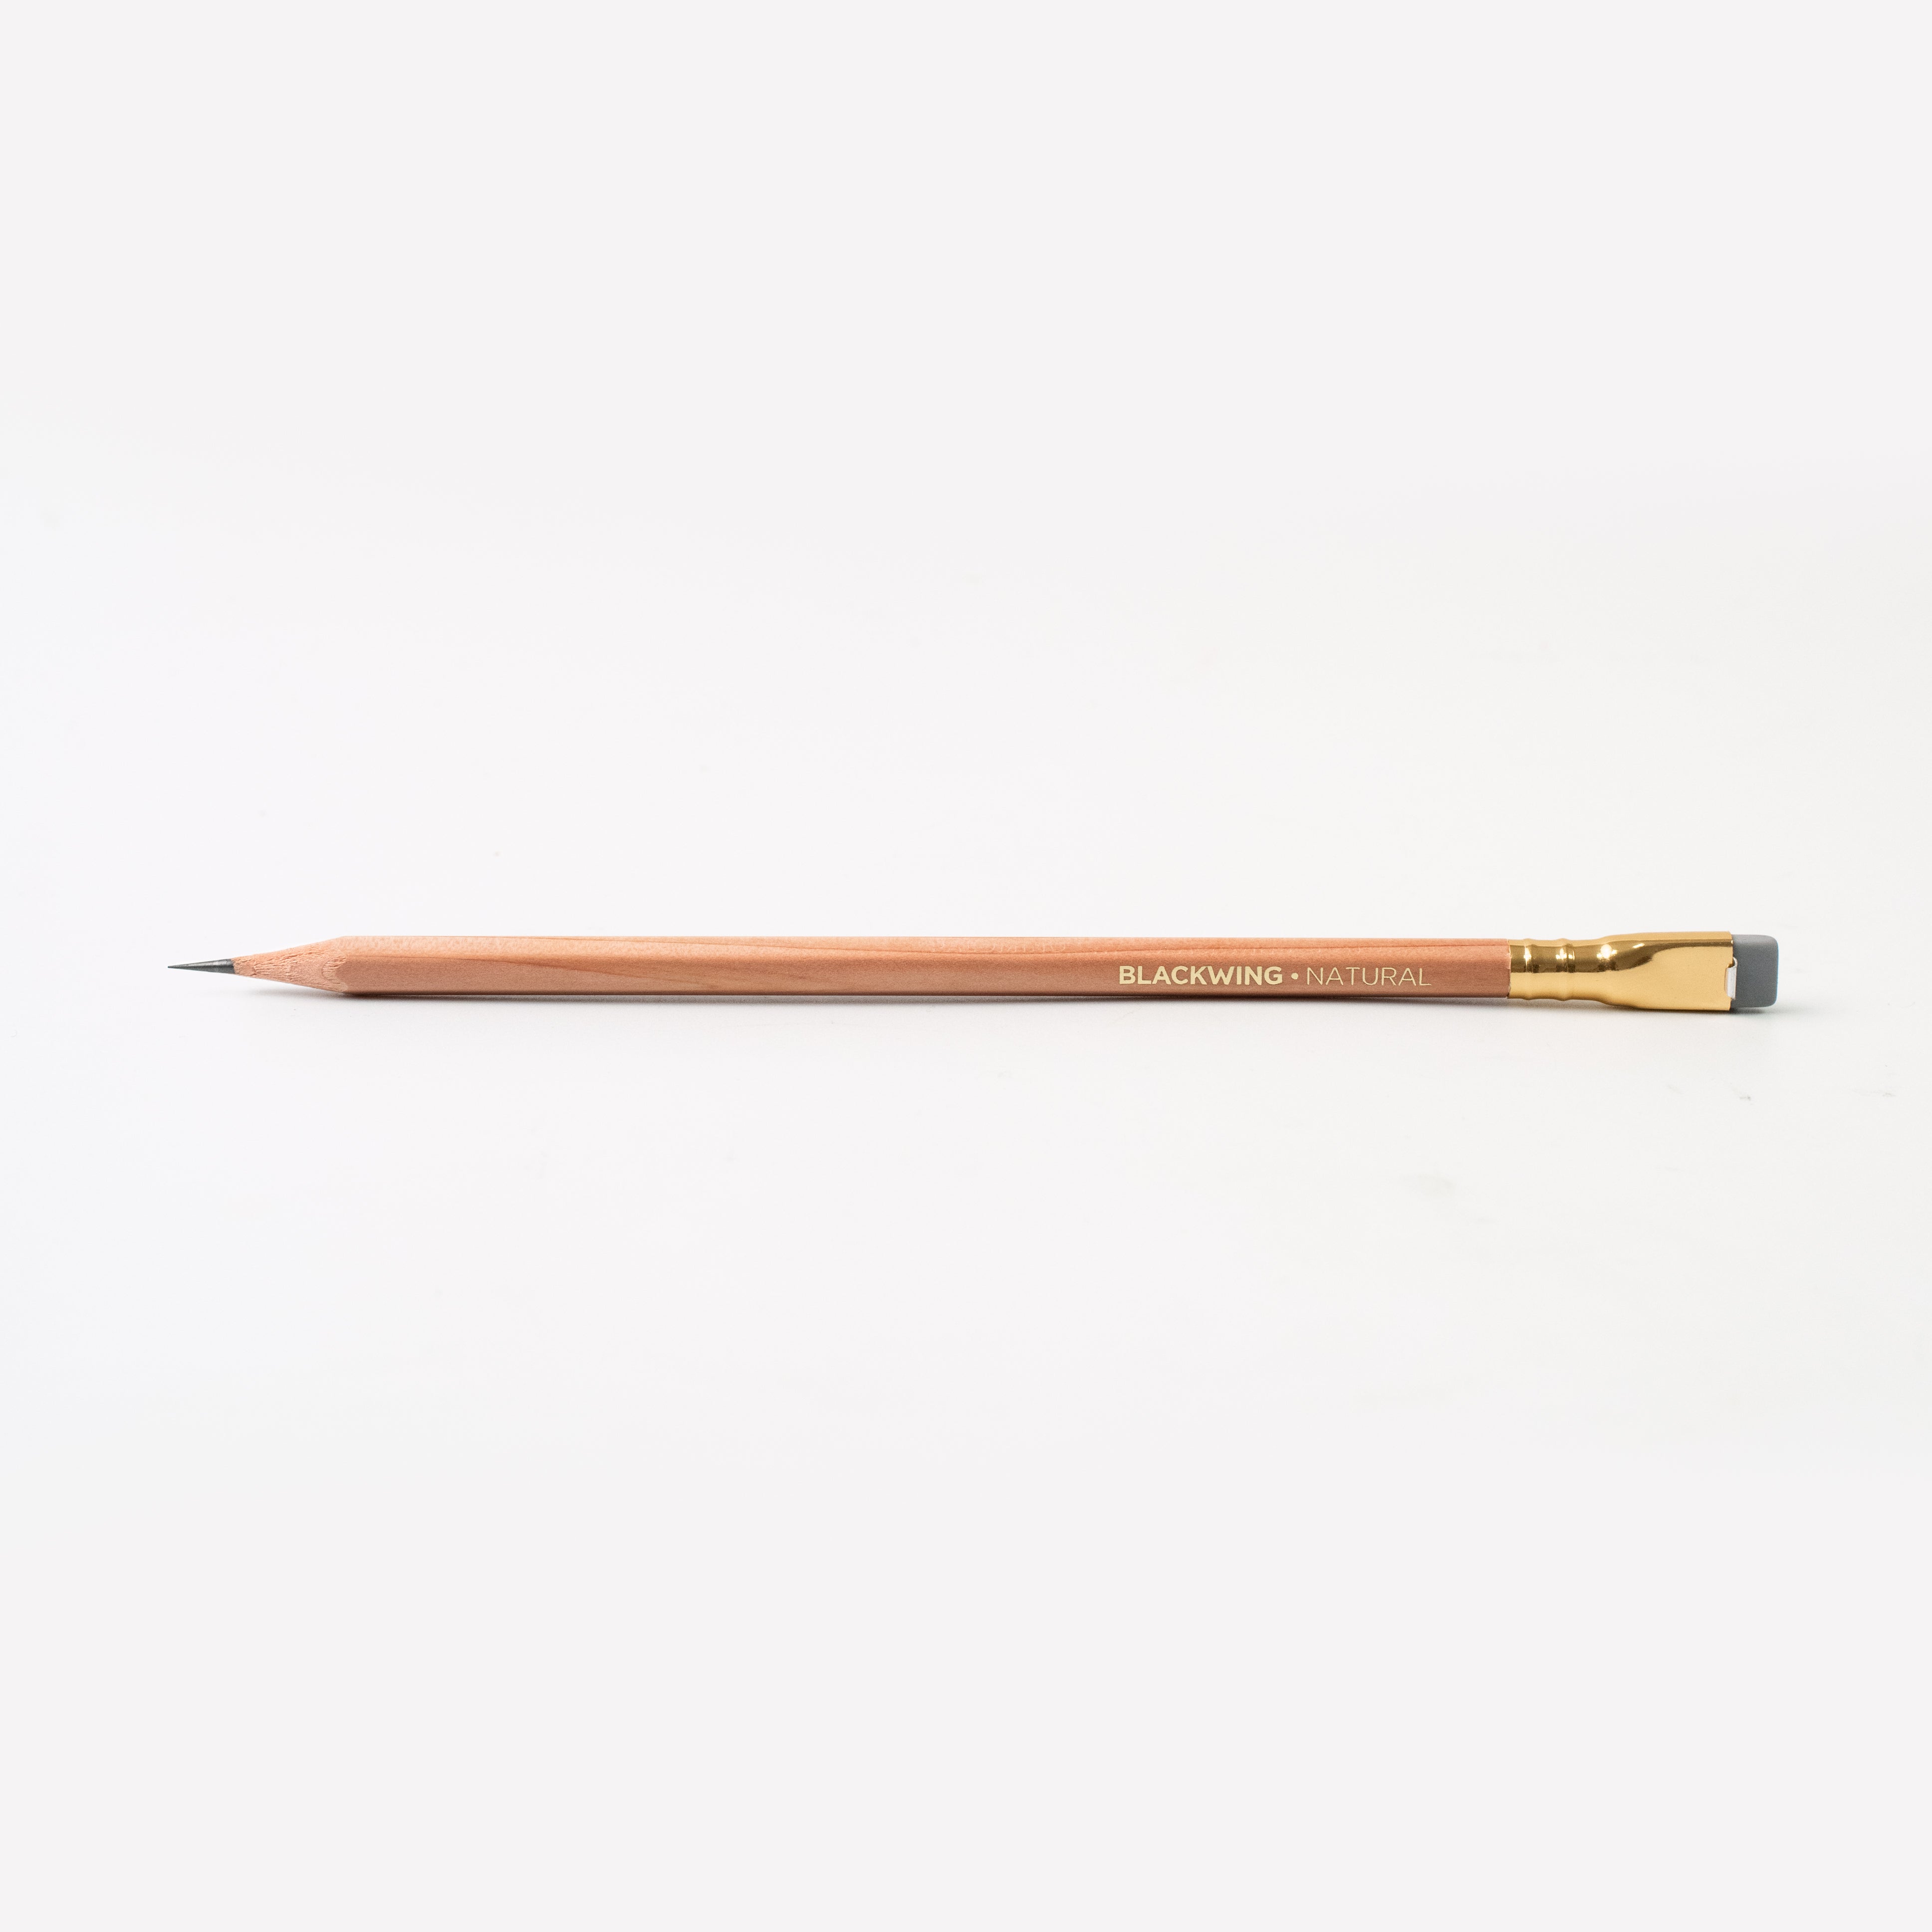 Pencil Blackwing, Blackwing Pearl. White shaft